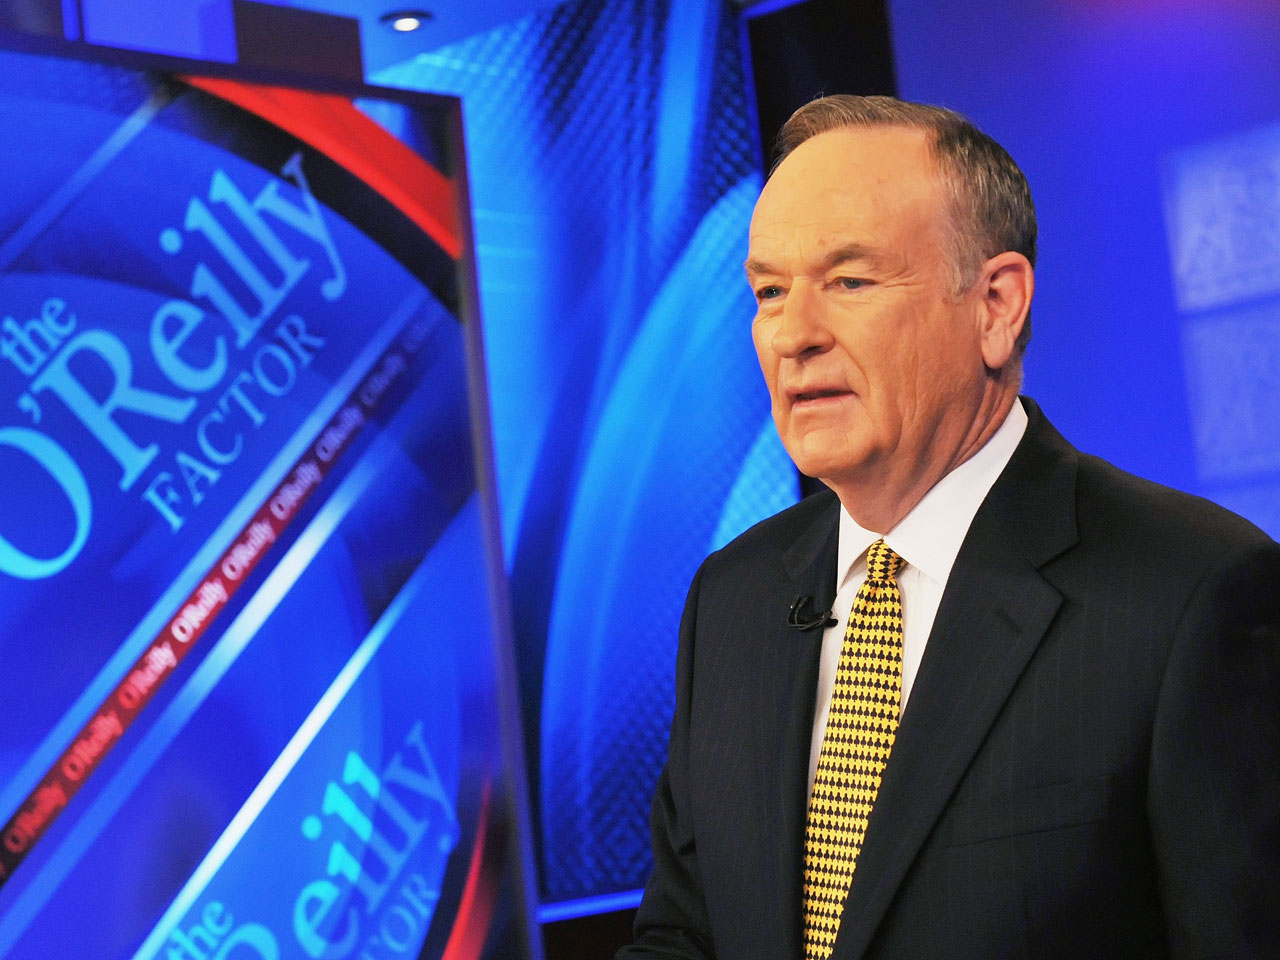 Bill O'Reilly says firing was "political hit job" and business decision